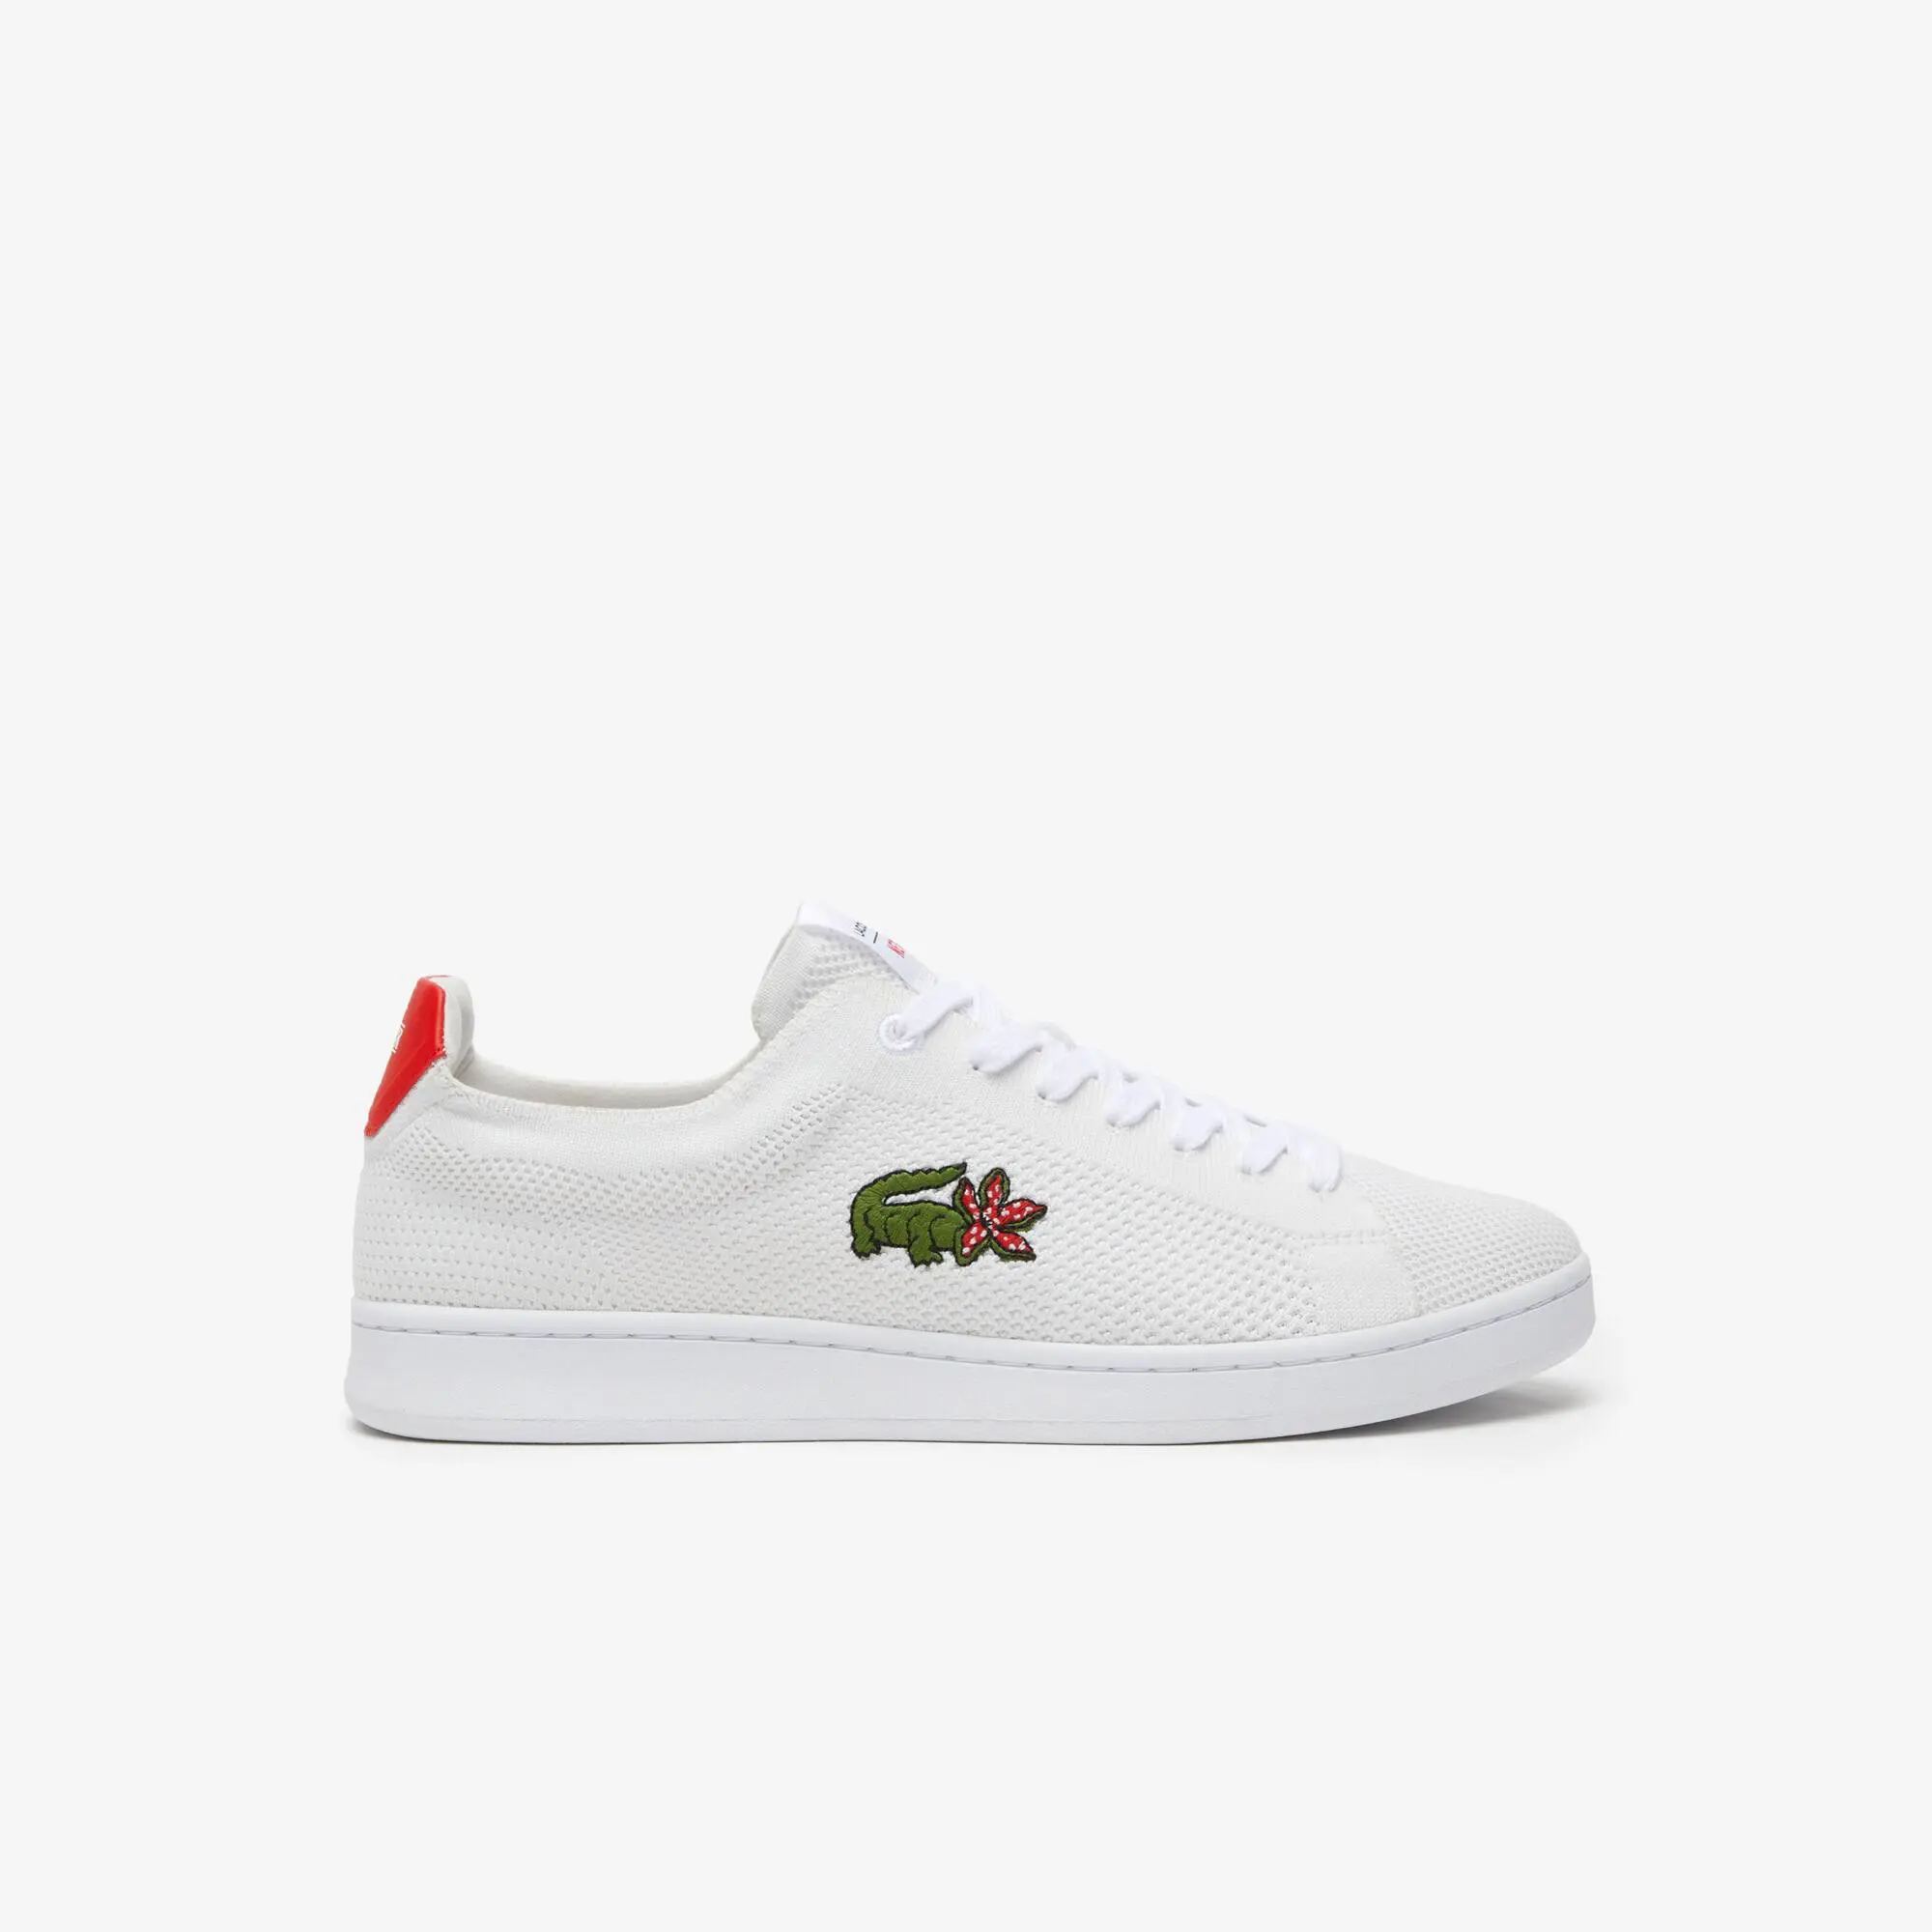 Lacoste Sneakers da uomo in tessuto Lacoste x Netflix Stranger Things Carnaby Piquée. 1